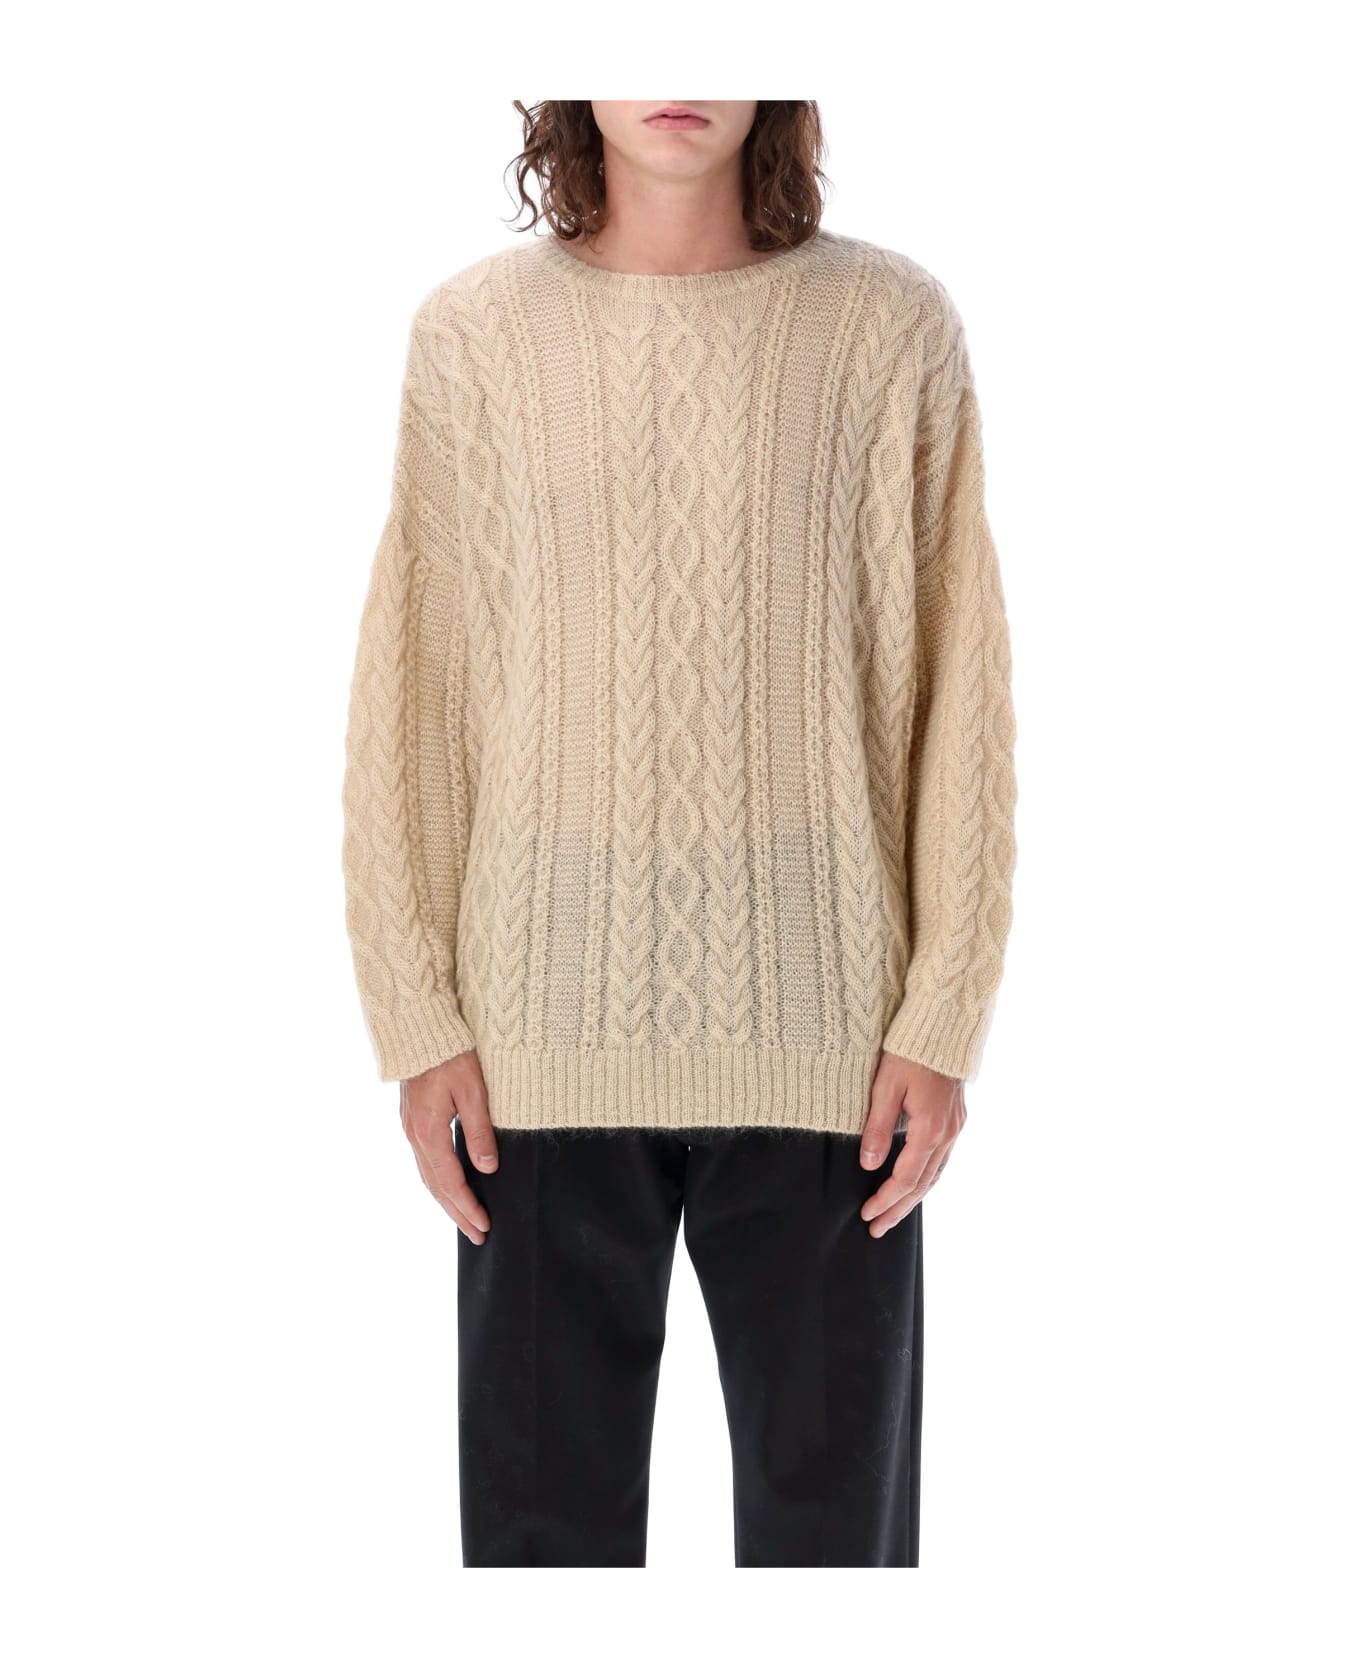 Undercover Jun Takahashi Cable Knit Sweater - IVORY